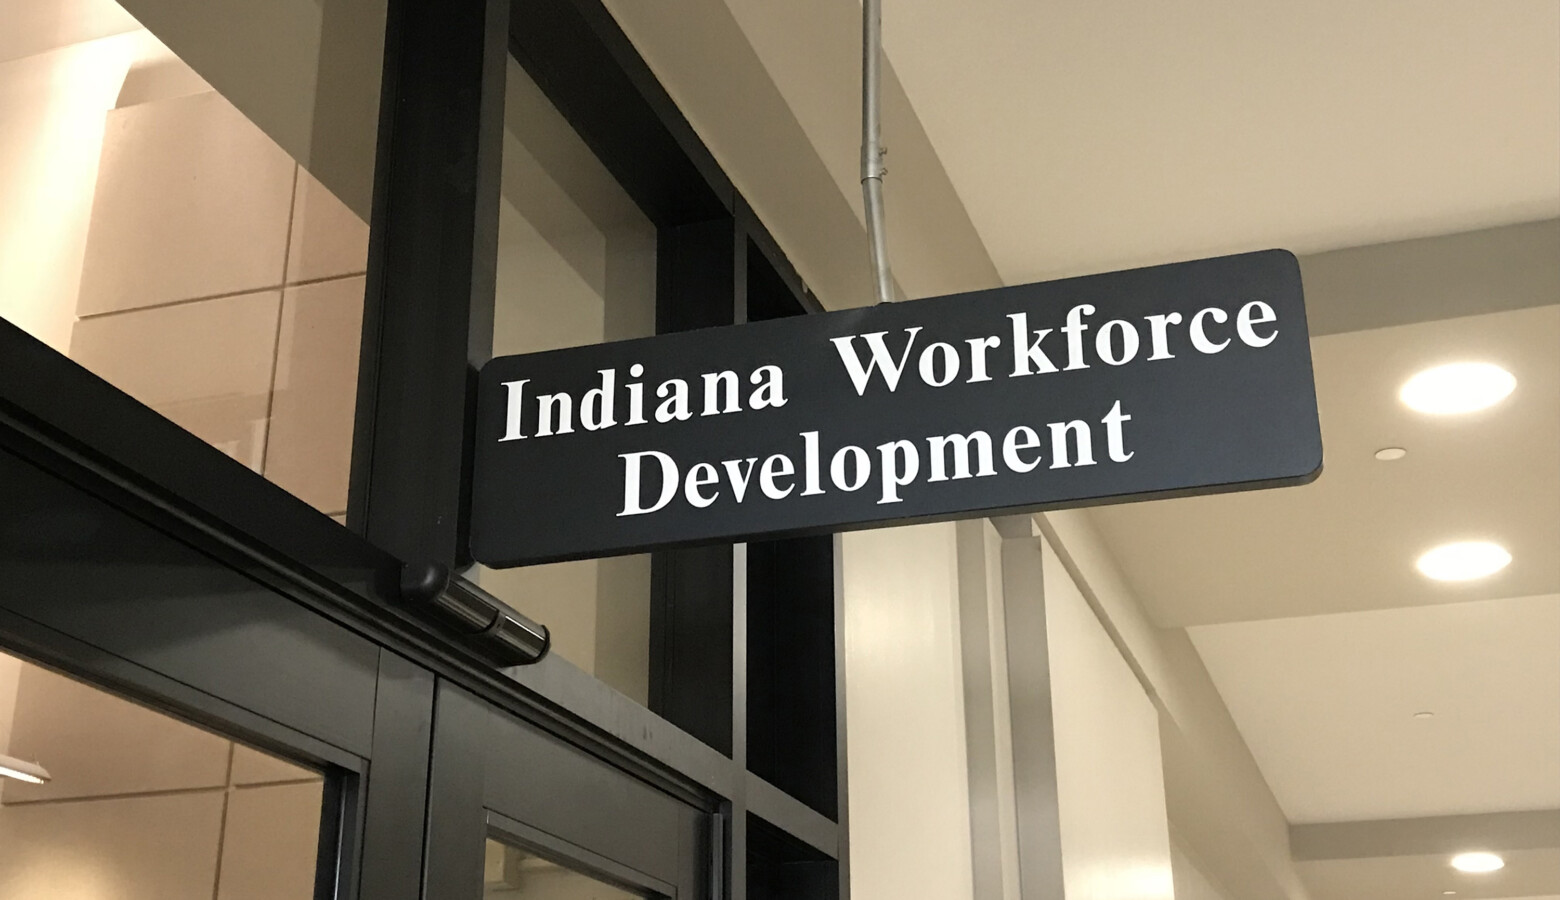 At the start of the year Indiana's unemployment trust fund had $900 million, but now stands at about $175 million. (Brandon Smith/IPB News)